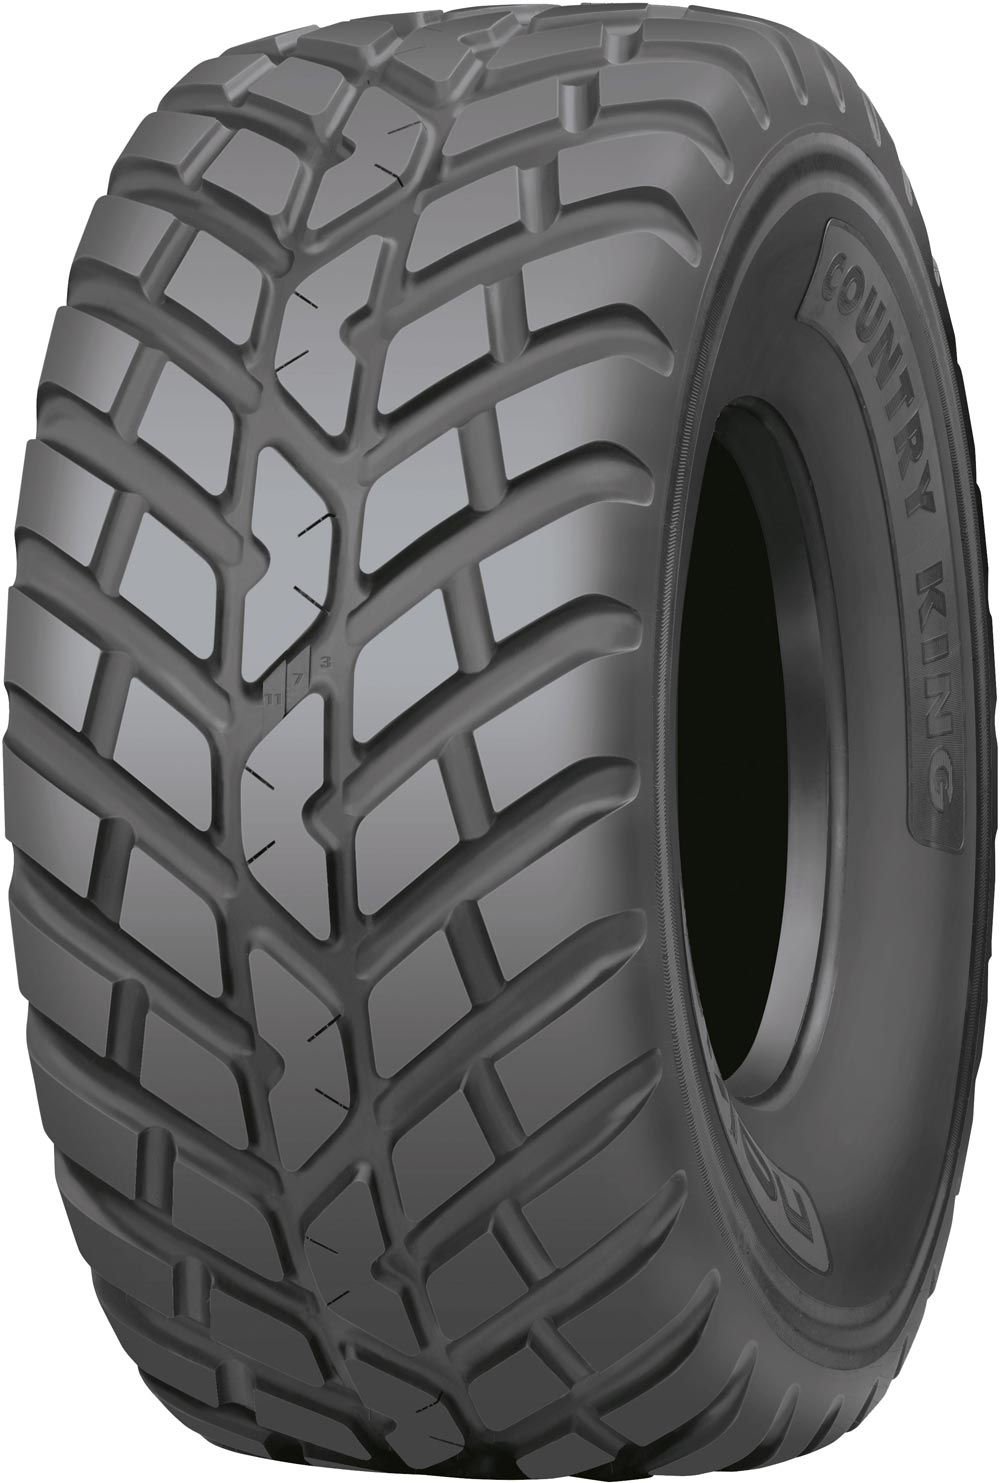 product_type-industrial_tires NOKIAN COUNTRY KING TL 600/55 R26.5 165D